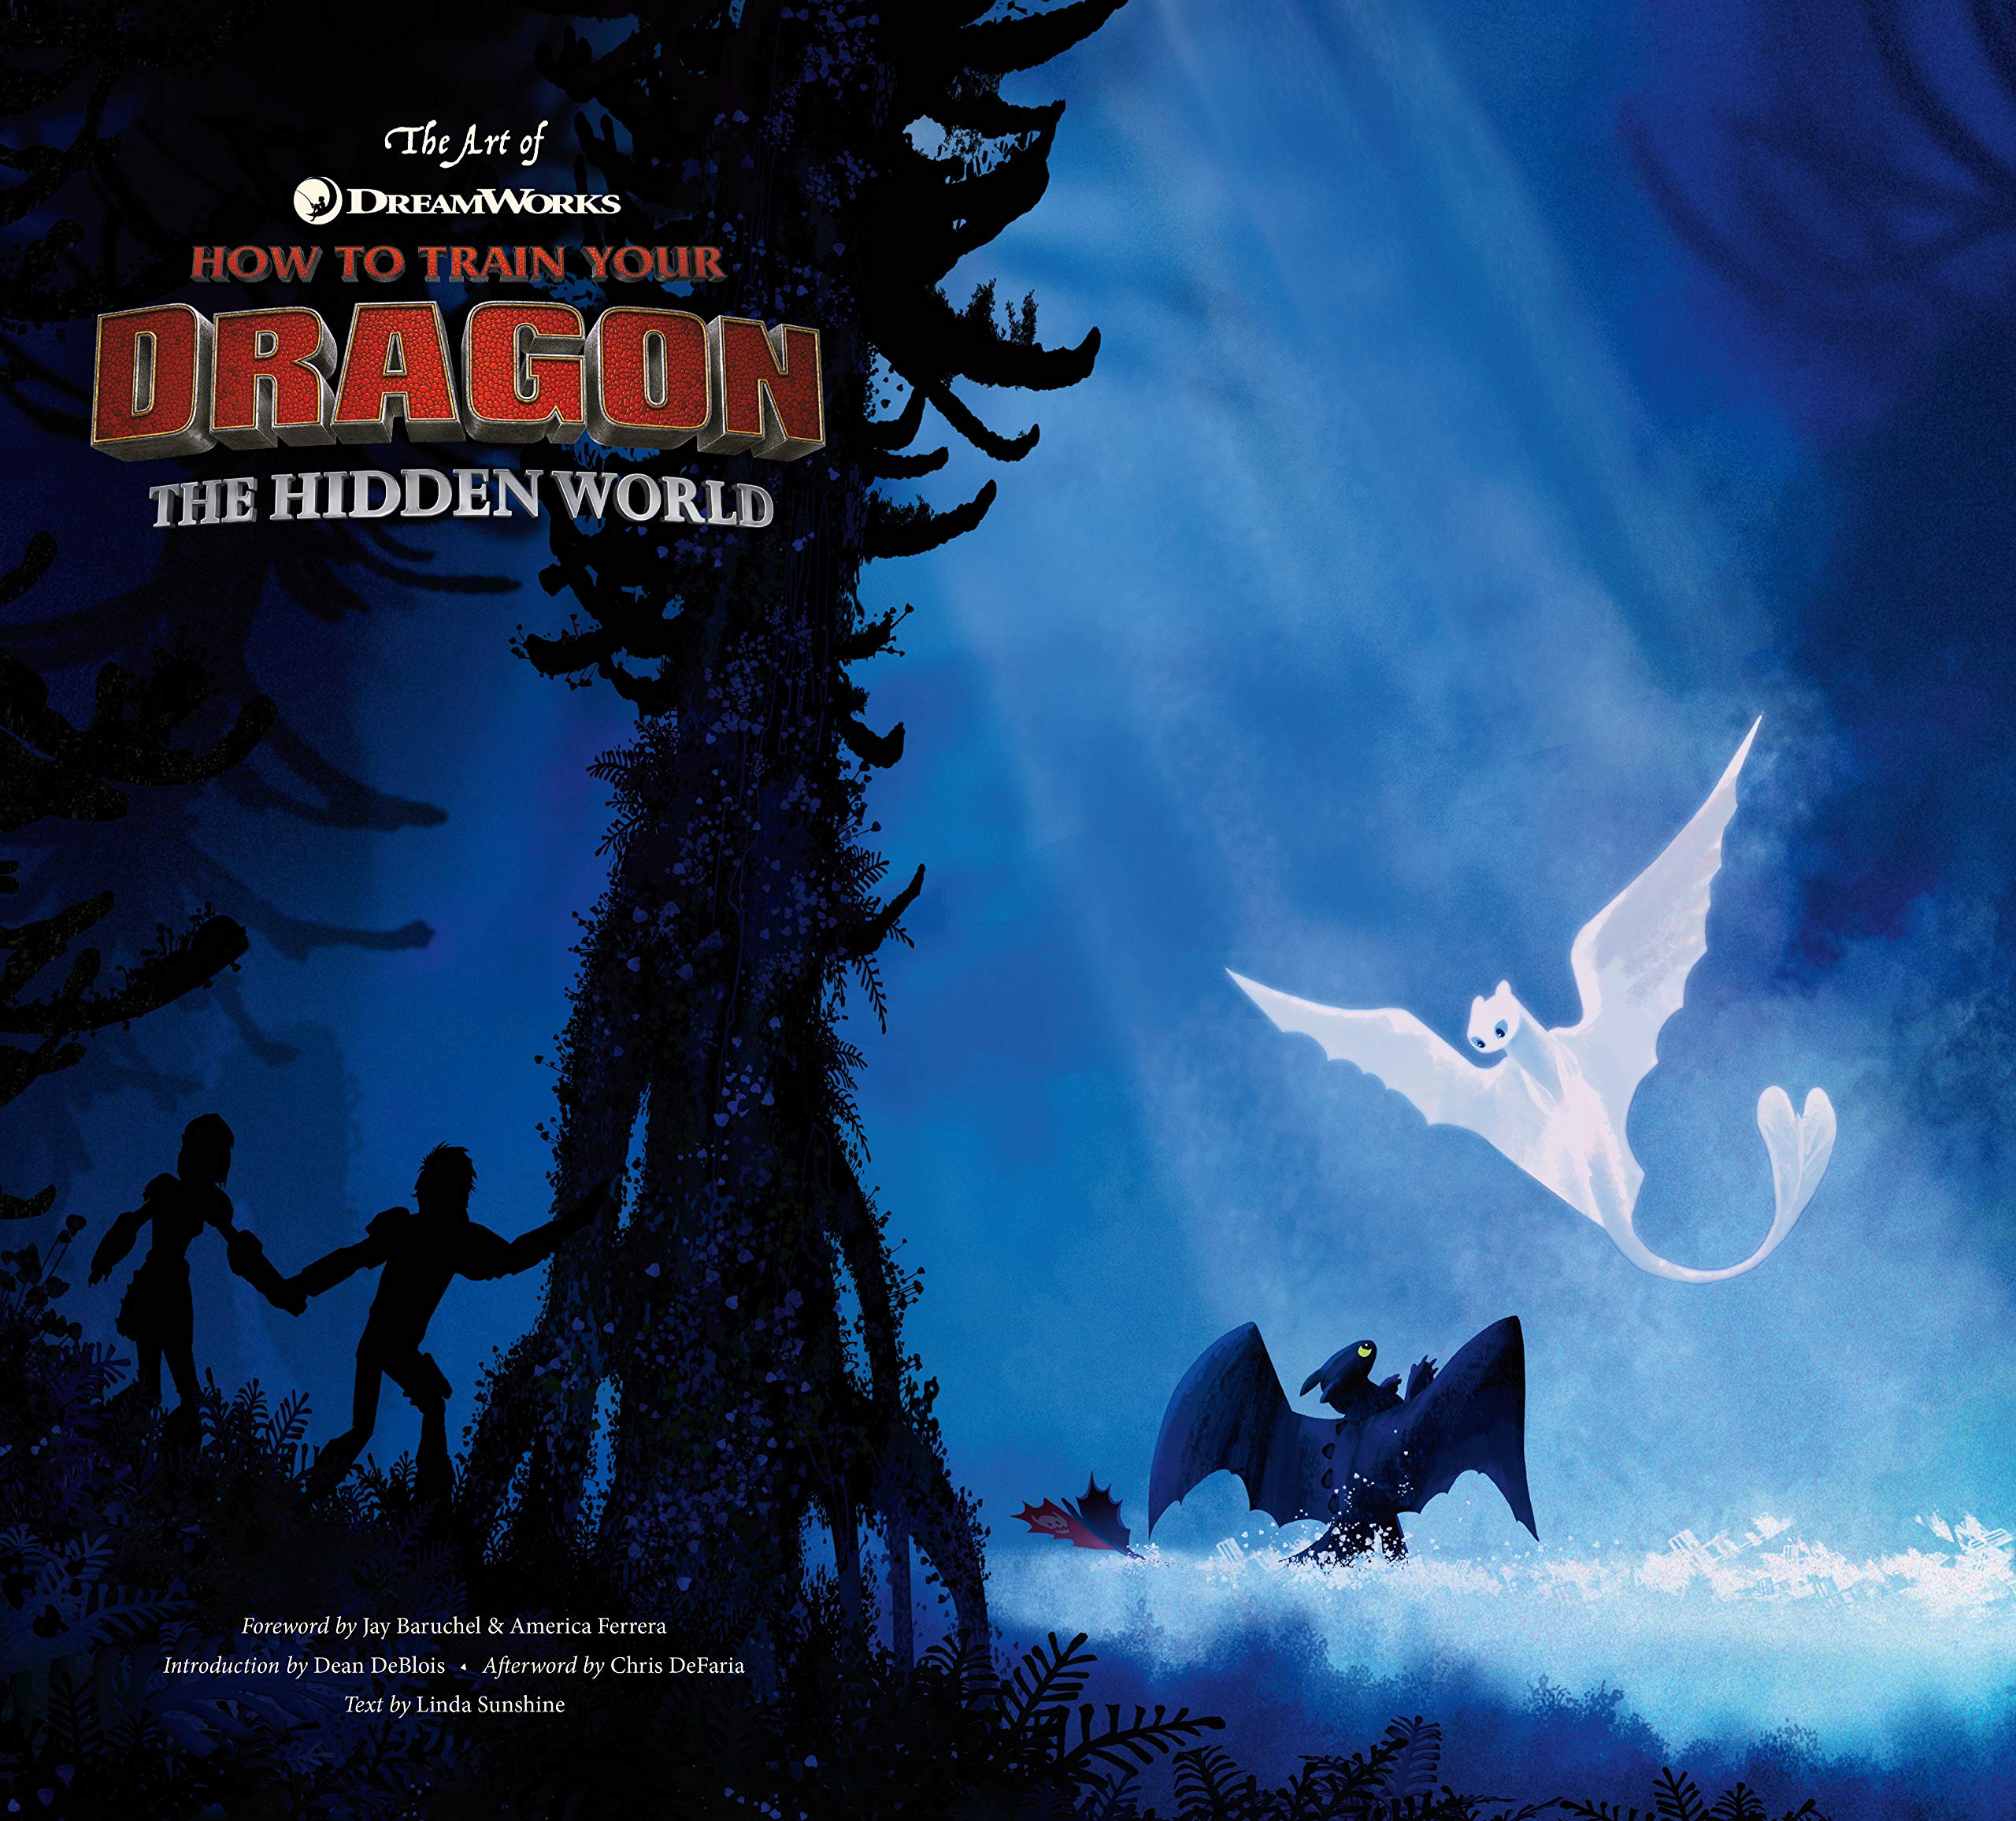 The art of Dreamworks' "How to train your dragon, the hidden world"